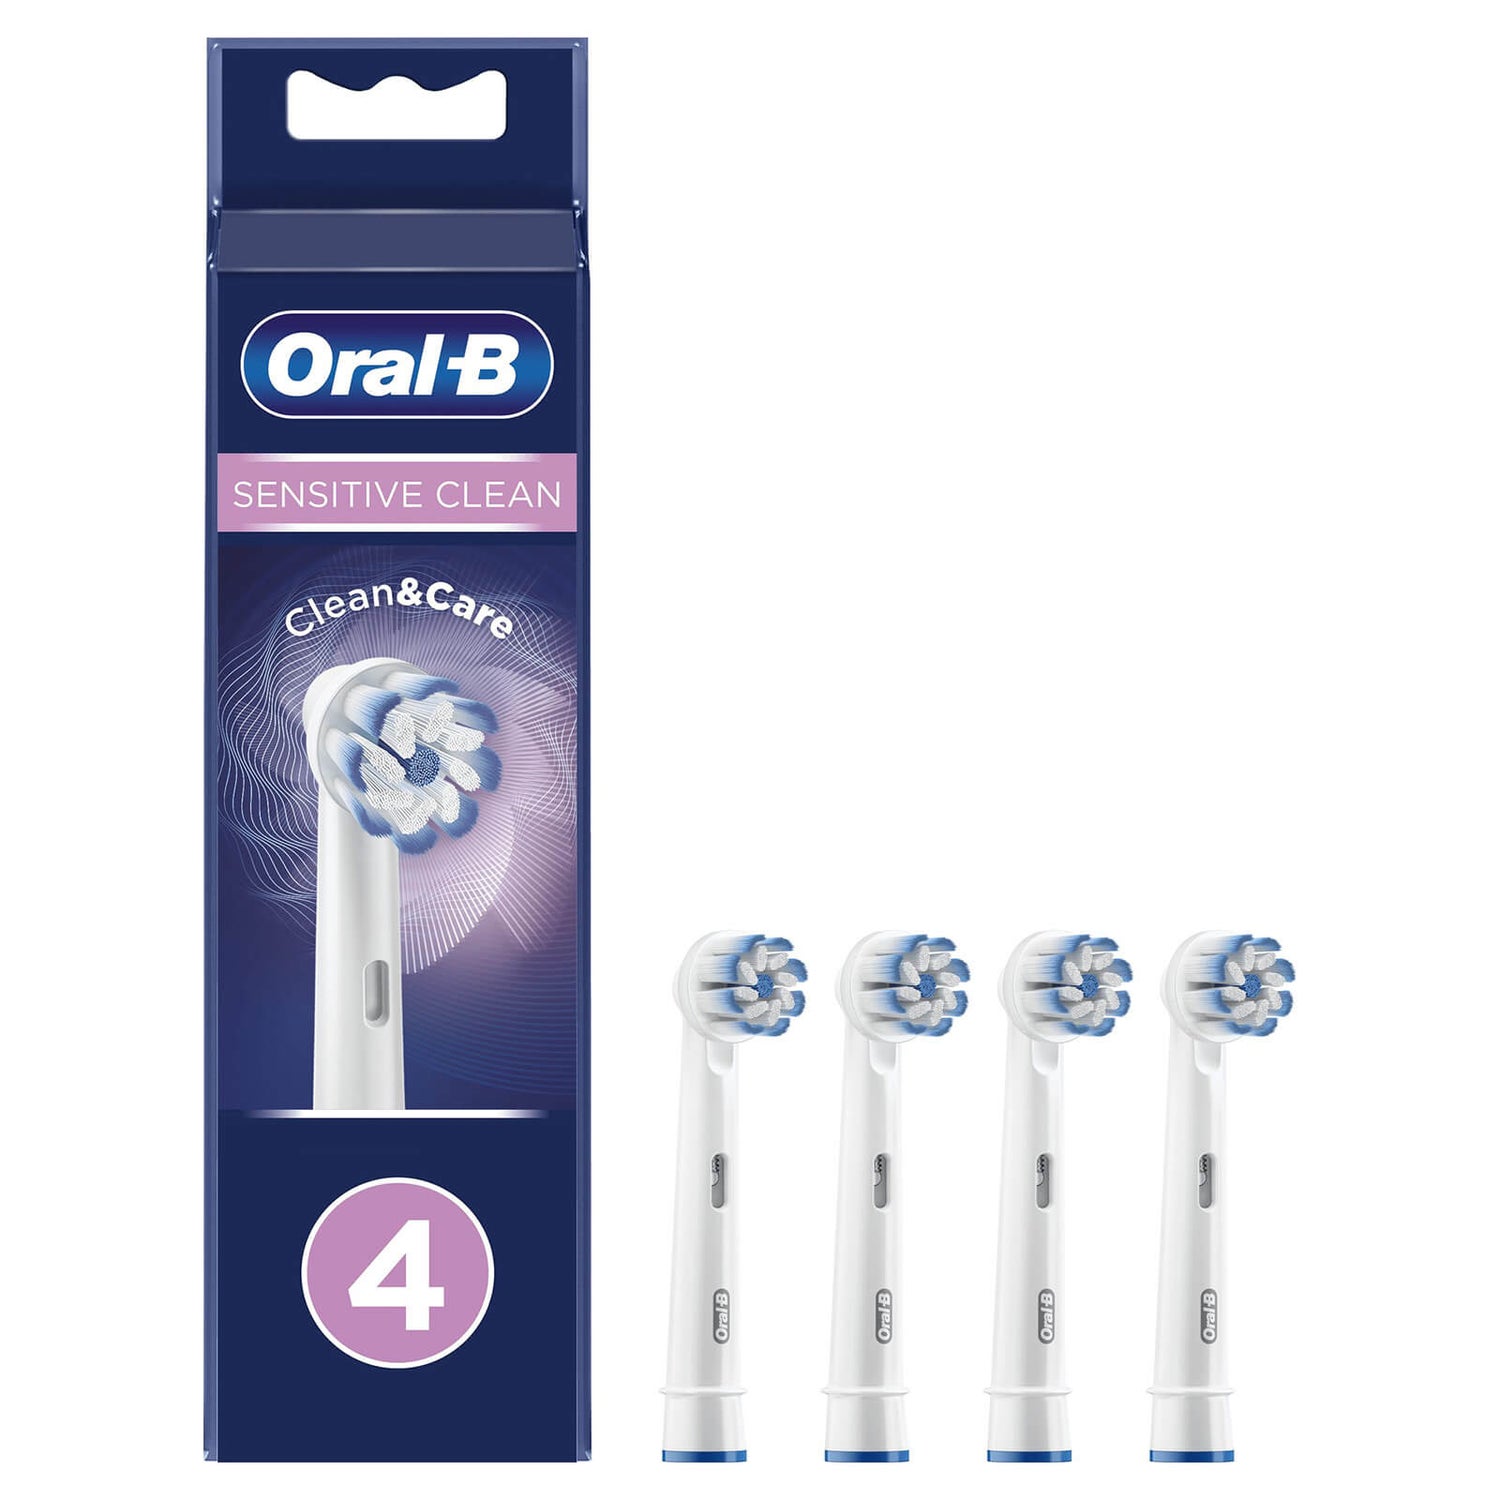 Oral-B Sensitive Clean Toothbrush Head, Pack of 4 Counts